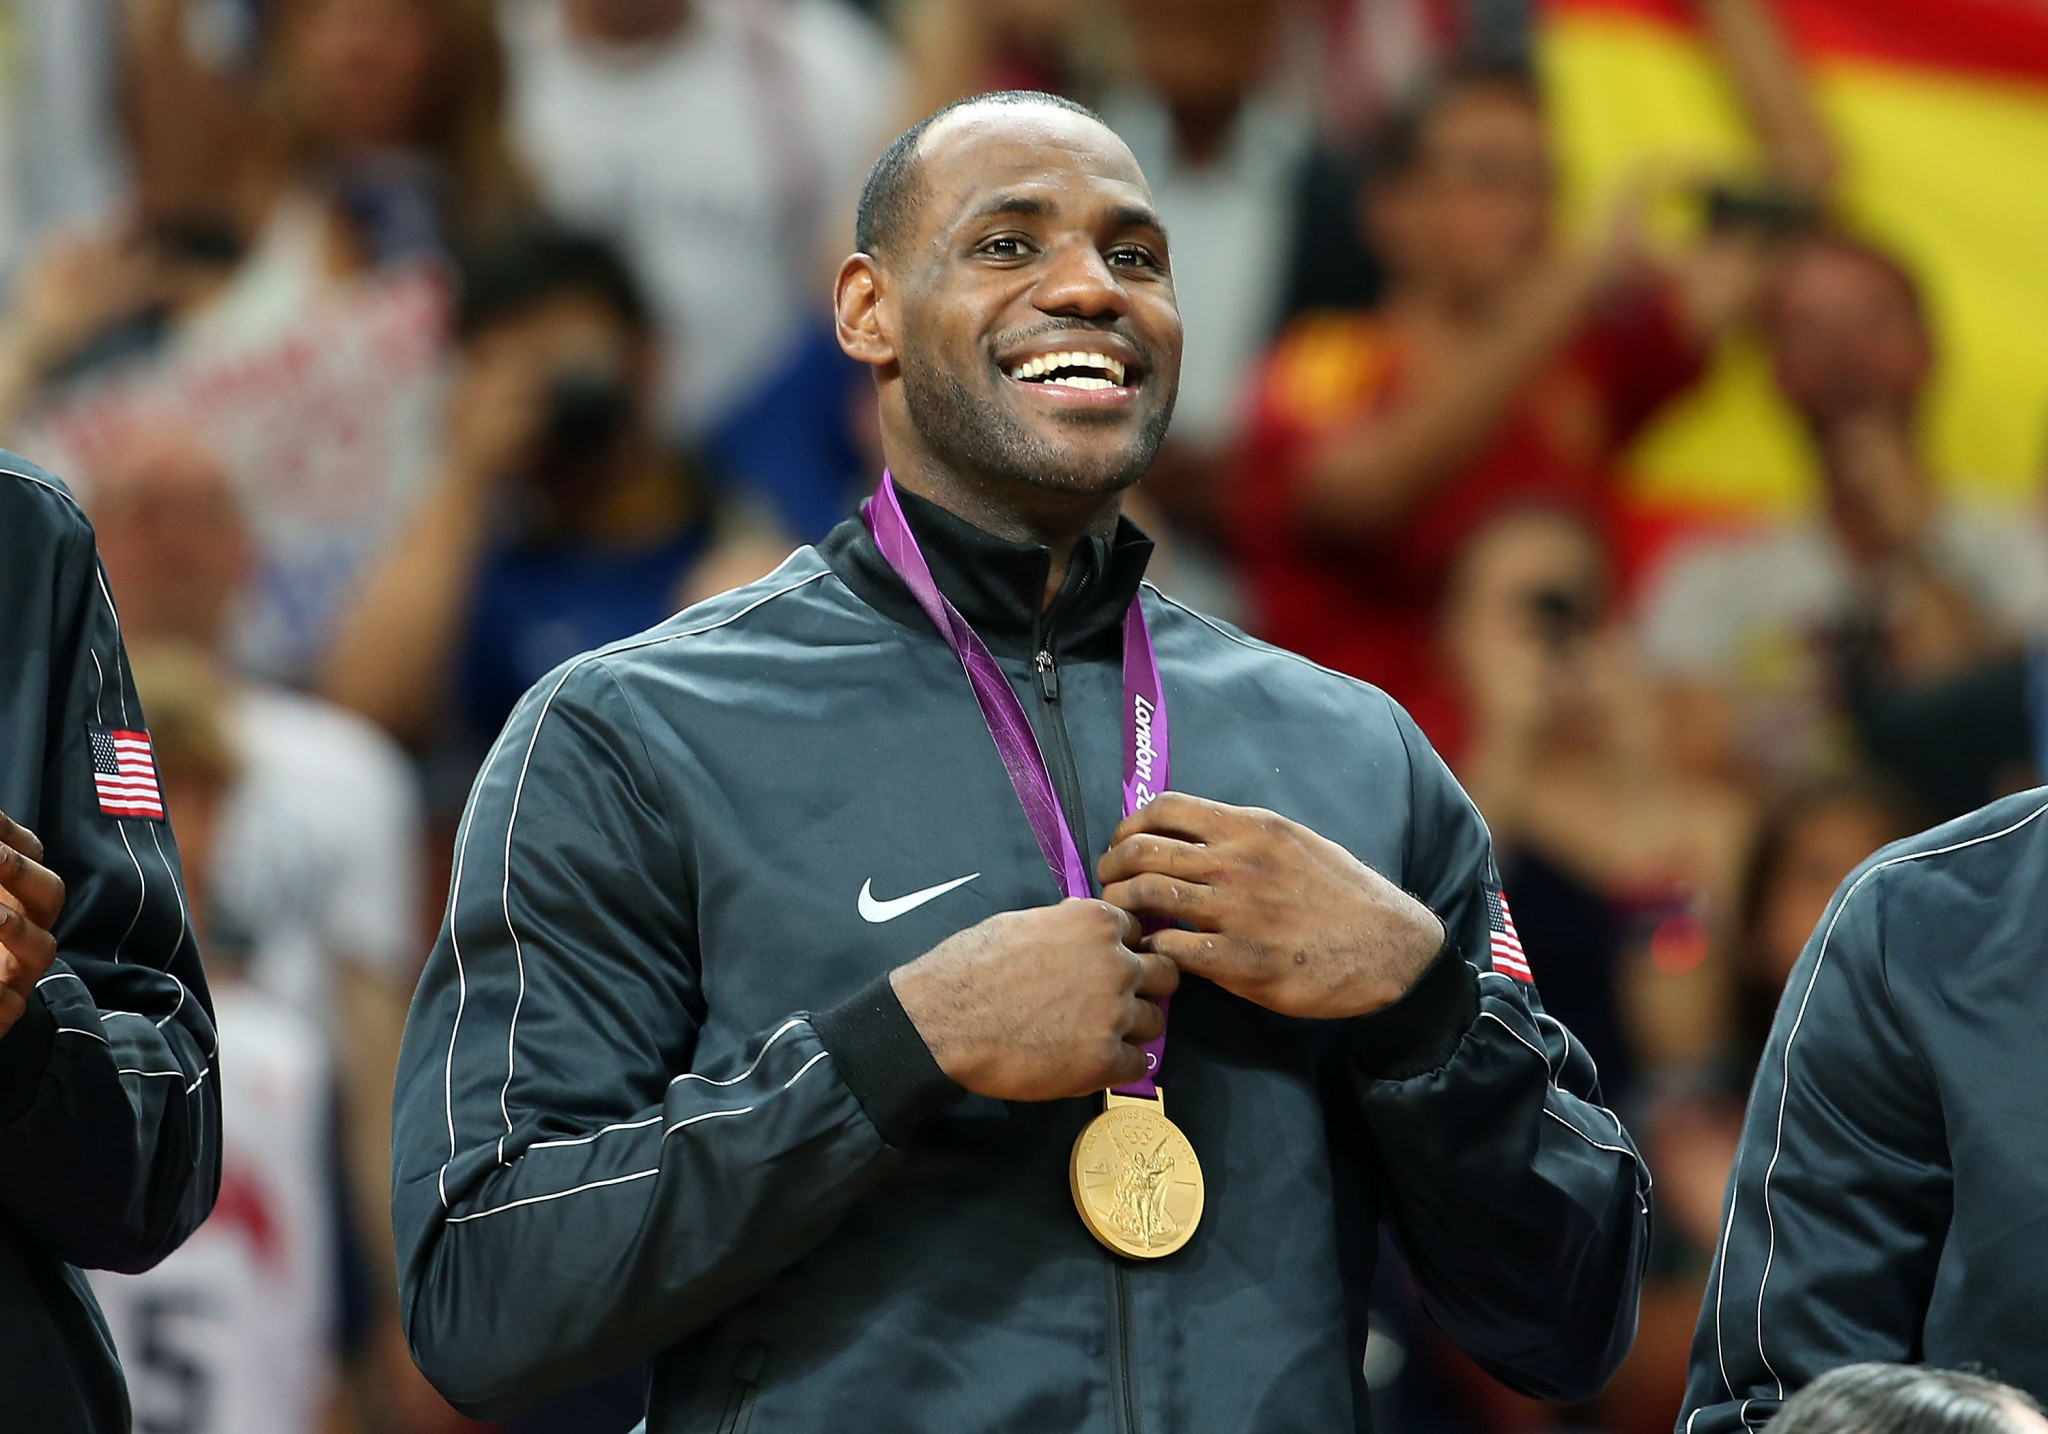 LeBron James is TIME's 2020 Athlete of the Year